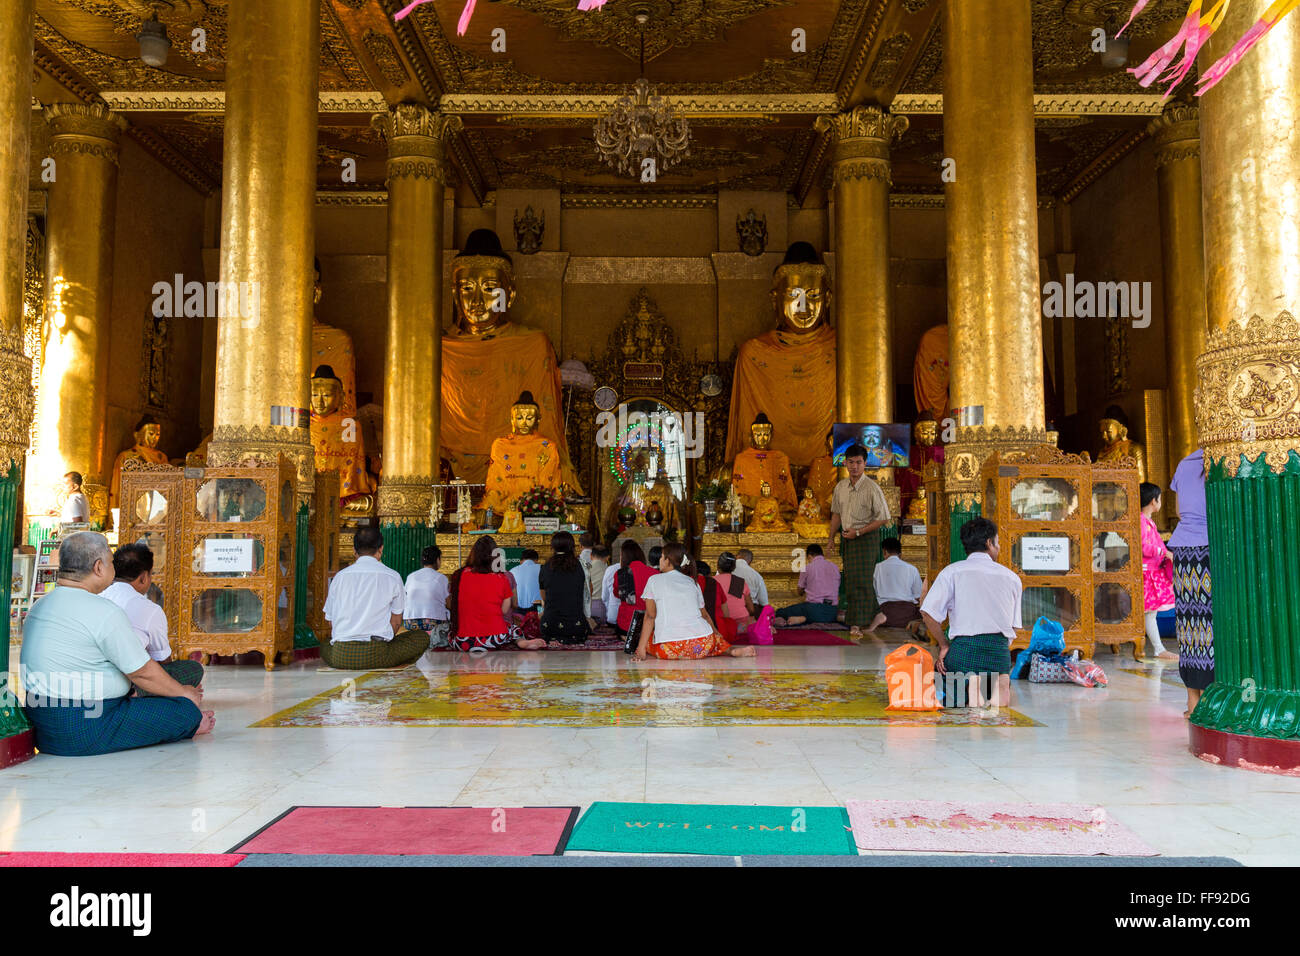 Yangon, Myanmar, 9th November 2015: The Shwedagon pagoda in Yangon is a very active temple where many people gather every day to Stock Photo